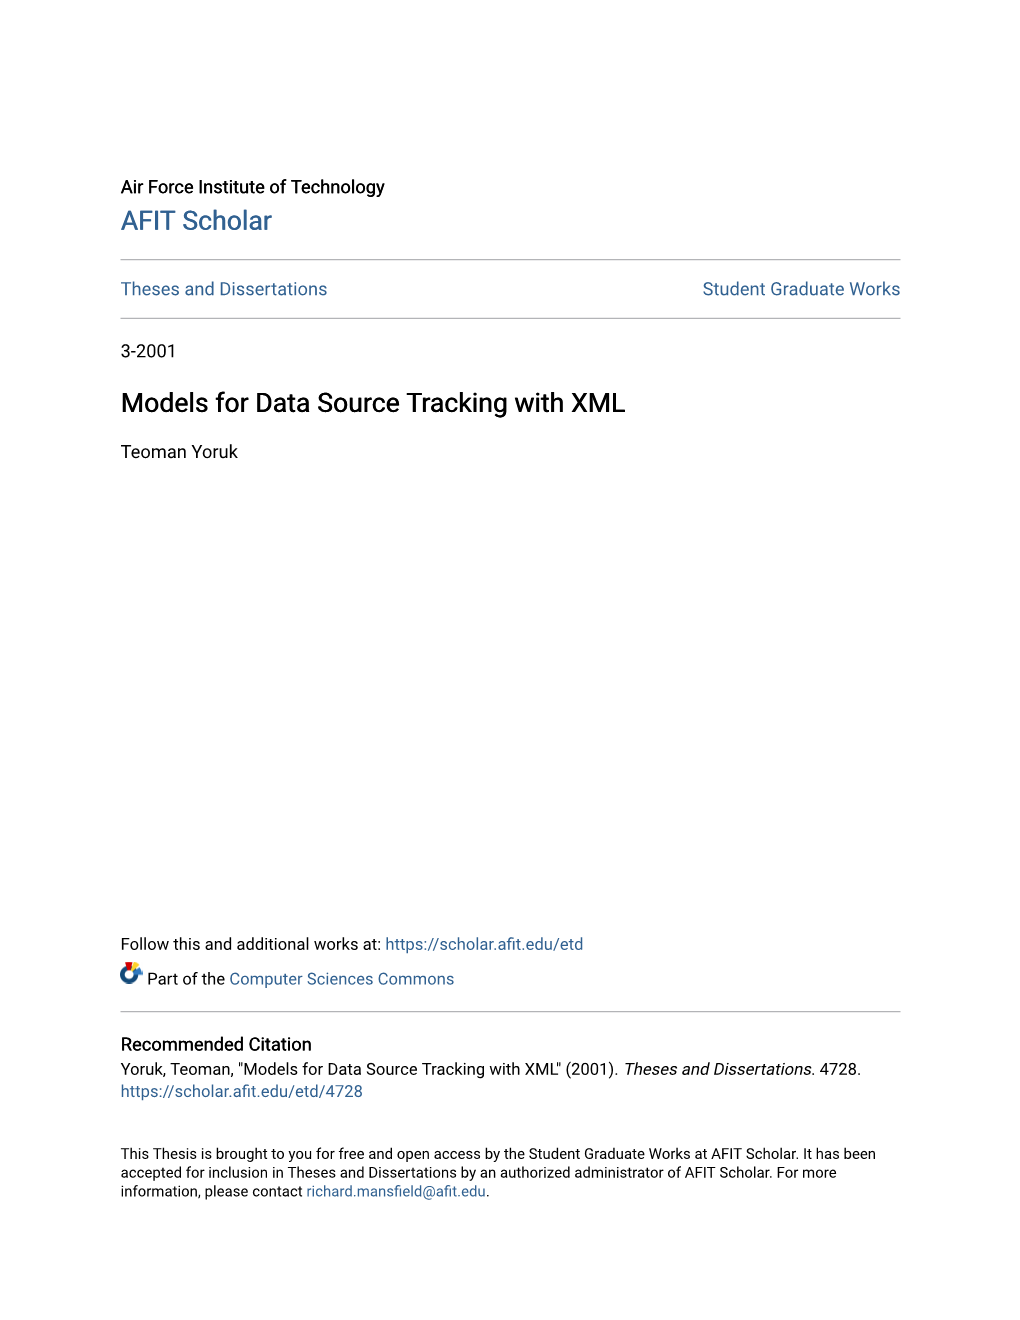 Models for Data Source Tracking with XML